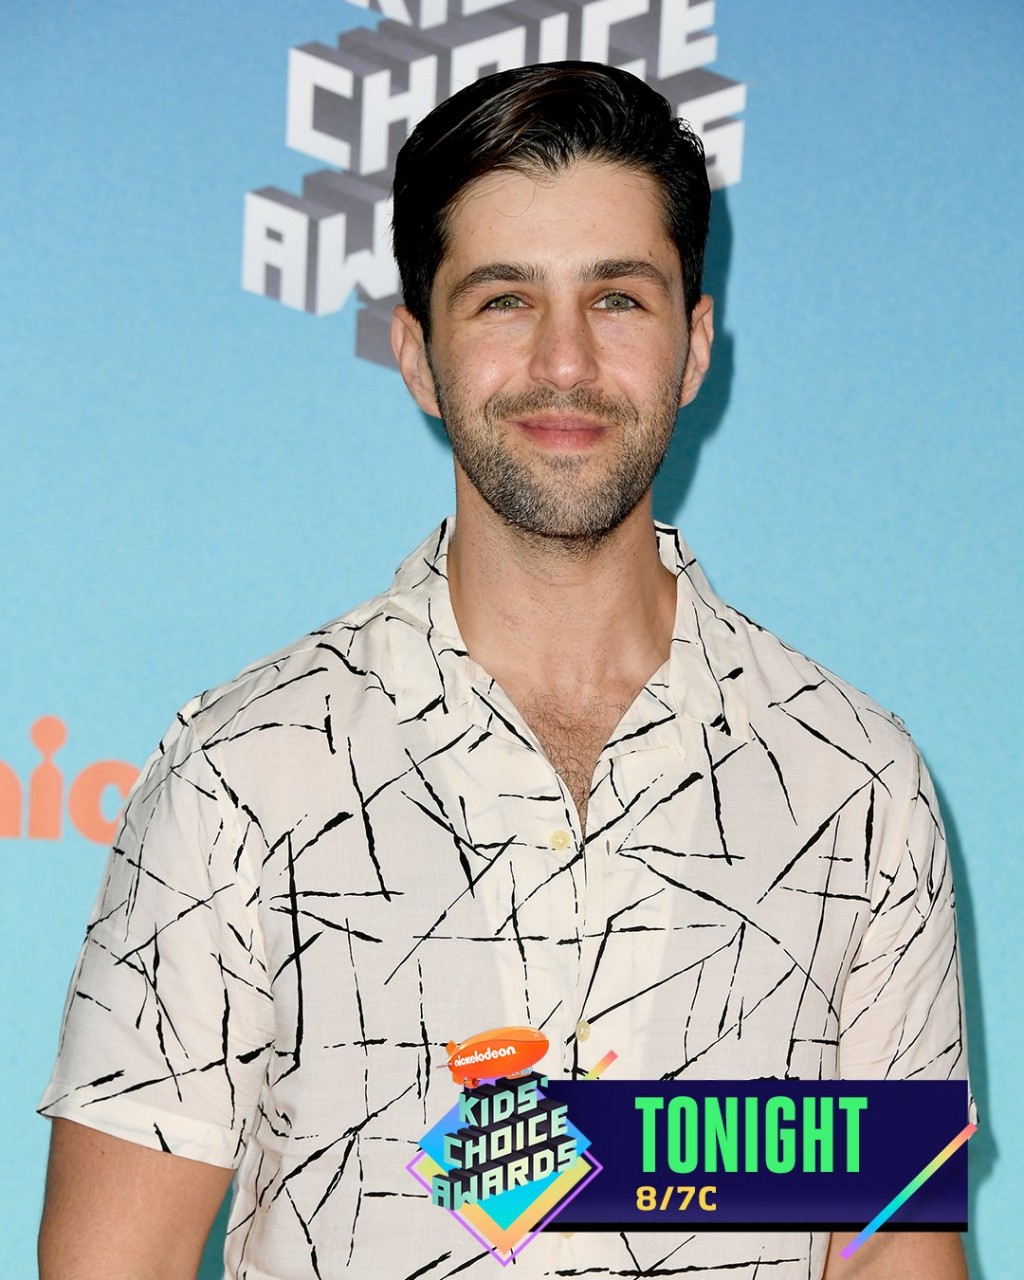 Adjustments made for Josh Peck’s ULS appearance